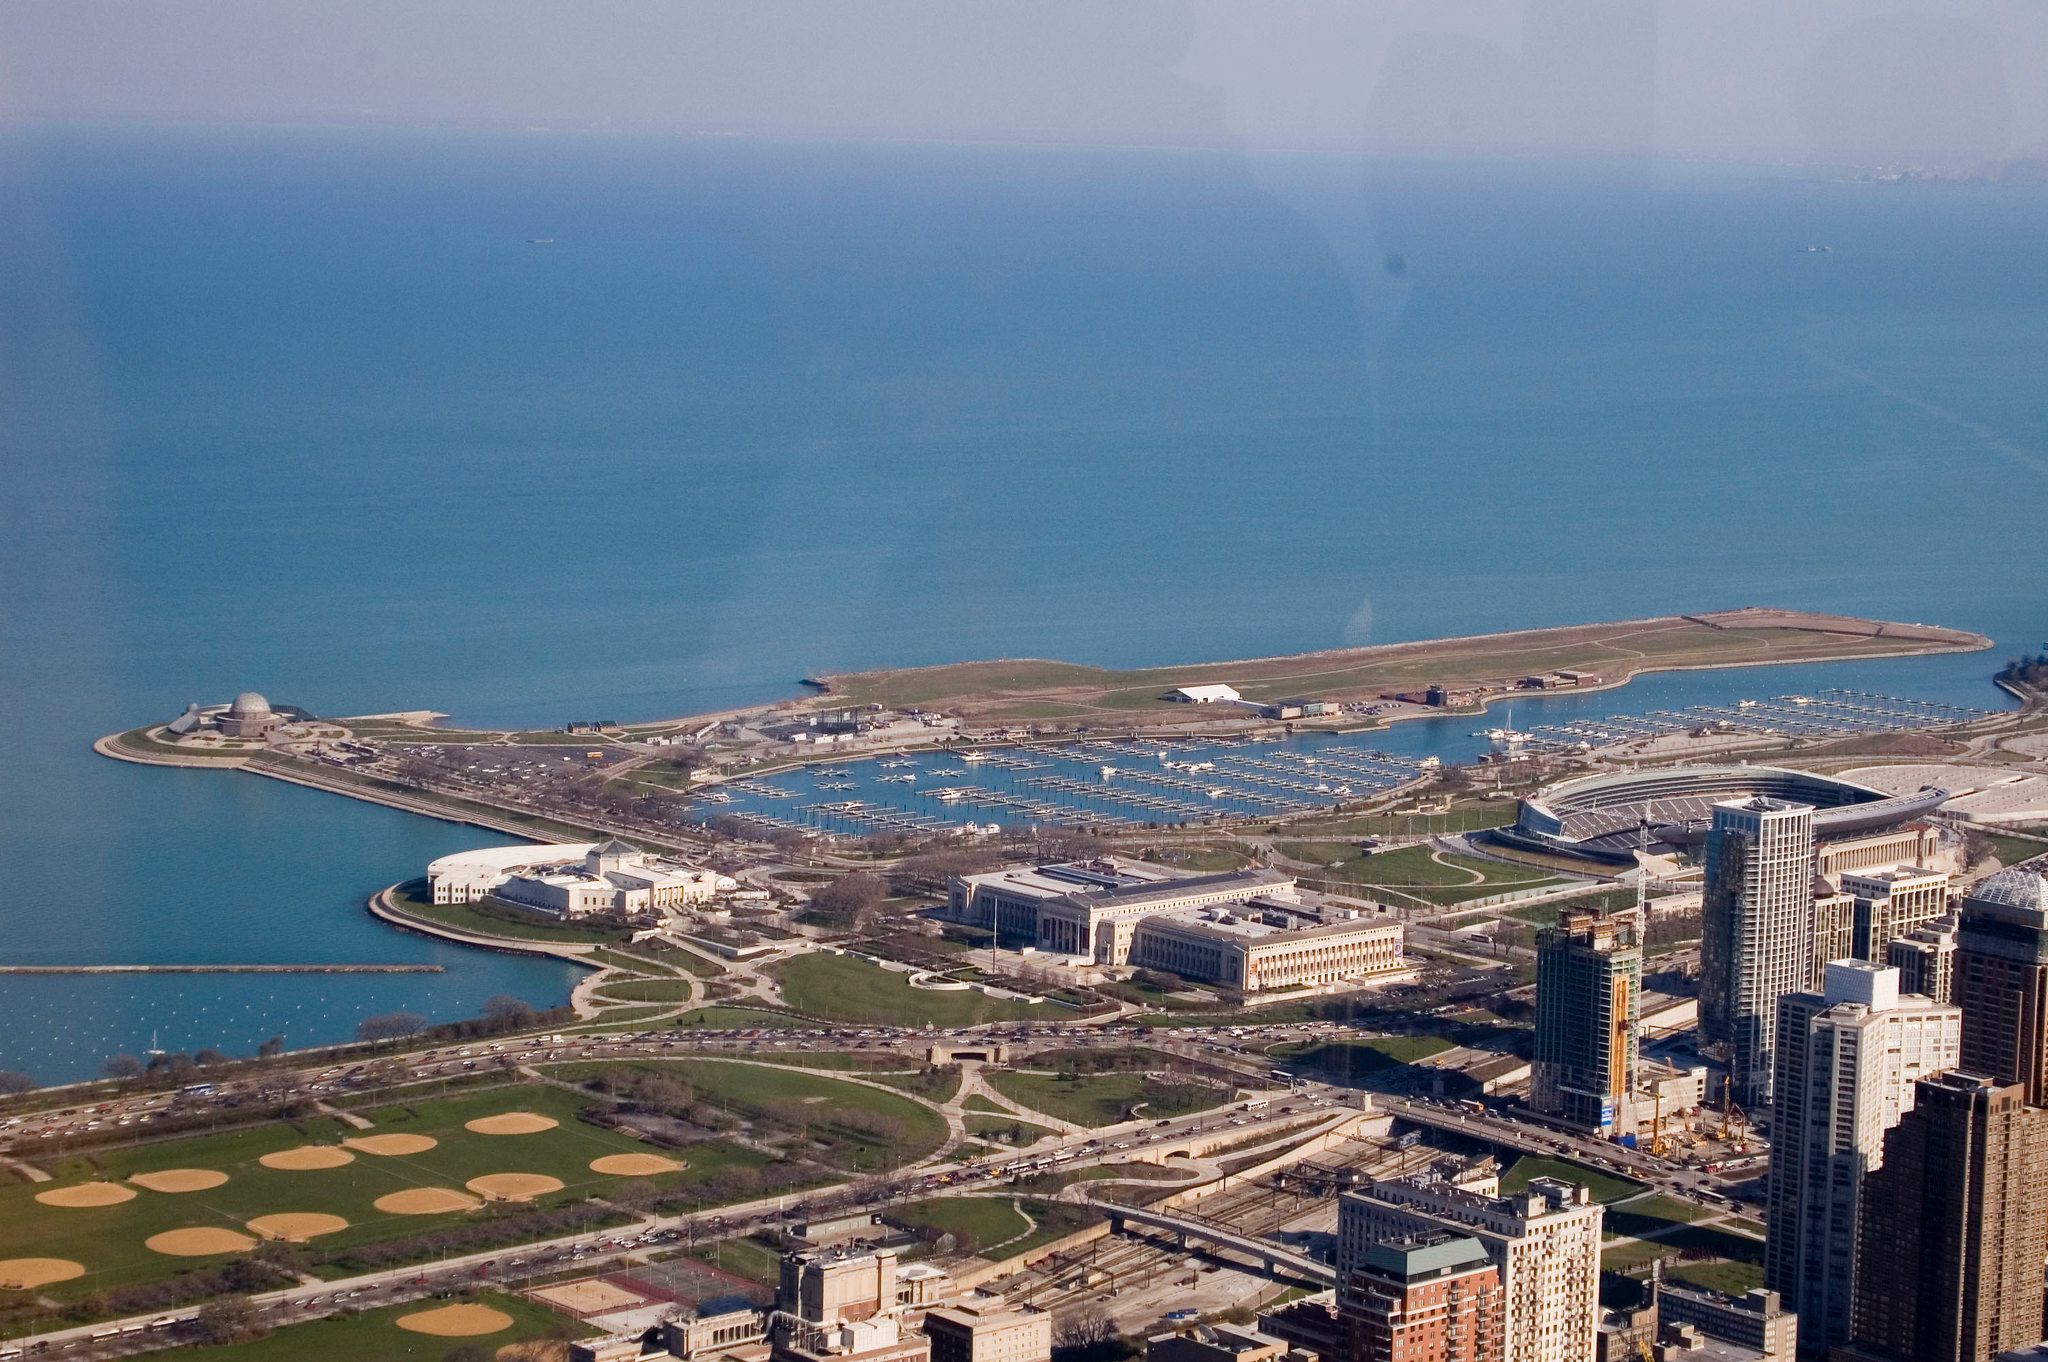 Aerial image of Meigs Field Airport in Chicago